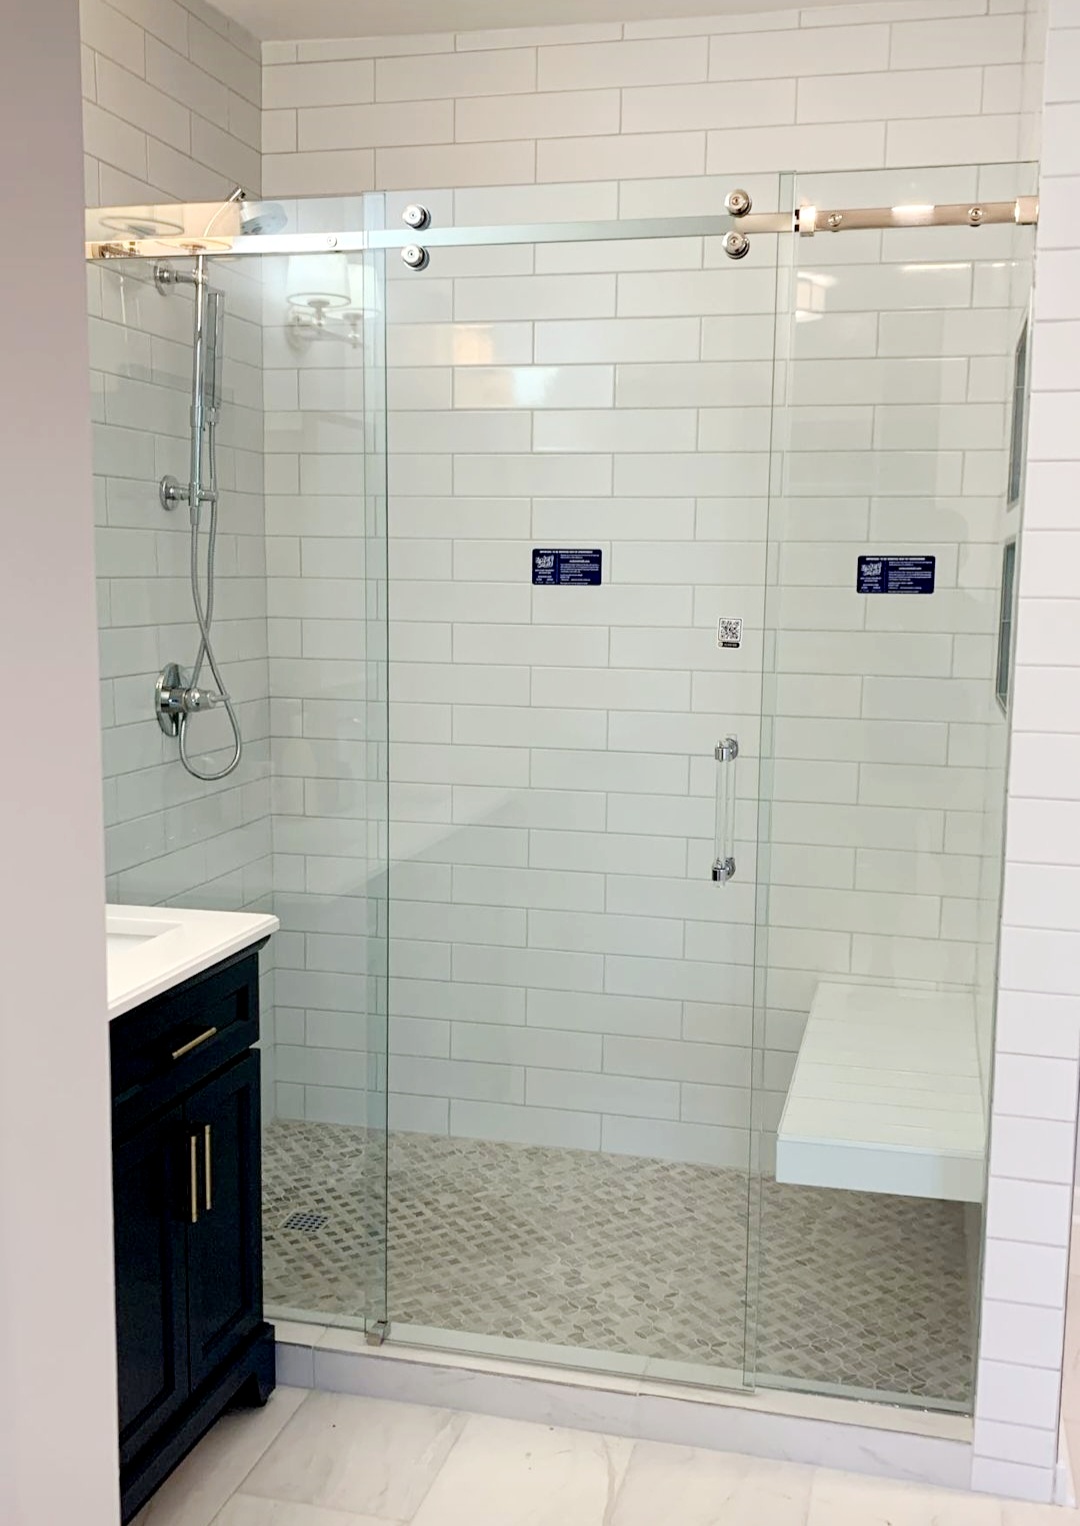 This is a Serenity slider from CR Laurence! The rollers are smaller and sleeker in appearance than the Crescent slider, however, the function is the same. This shower also features a GLASS handle from Portals Luxury Hardware!